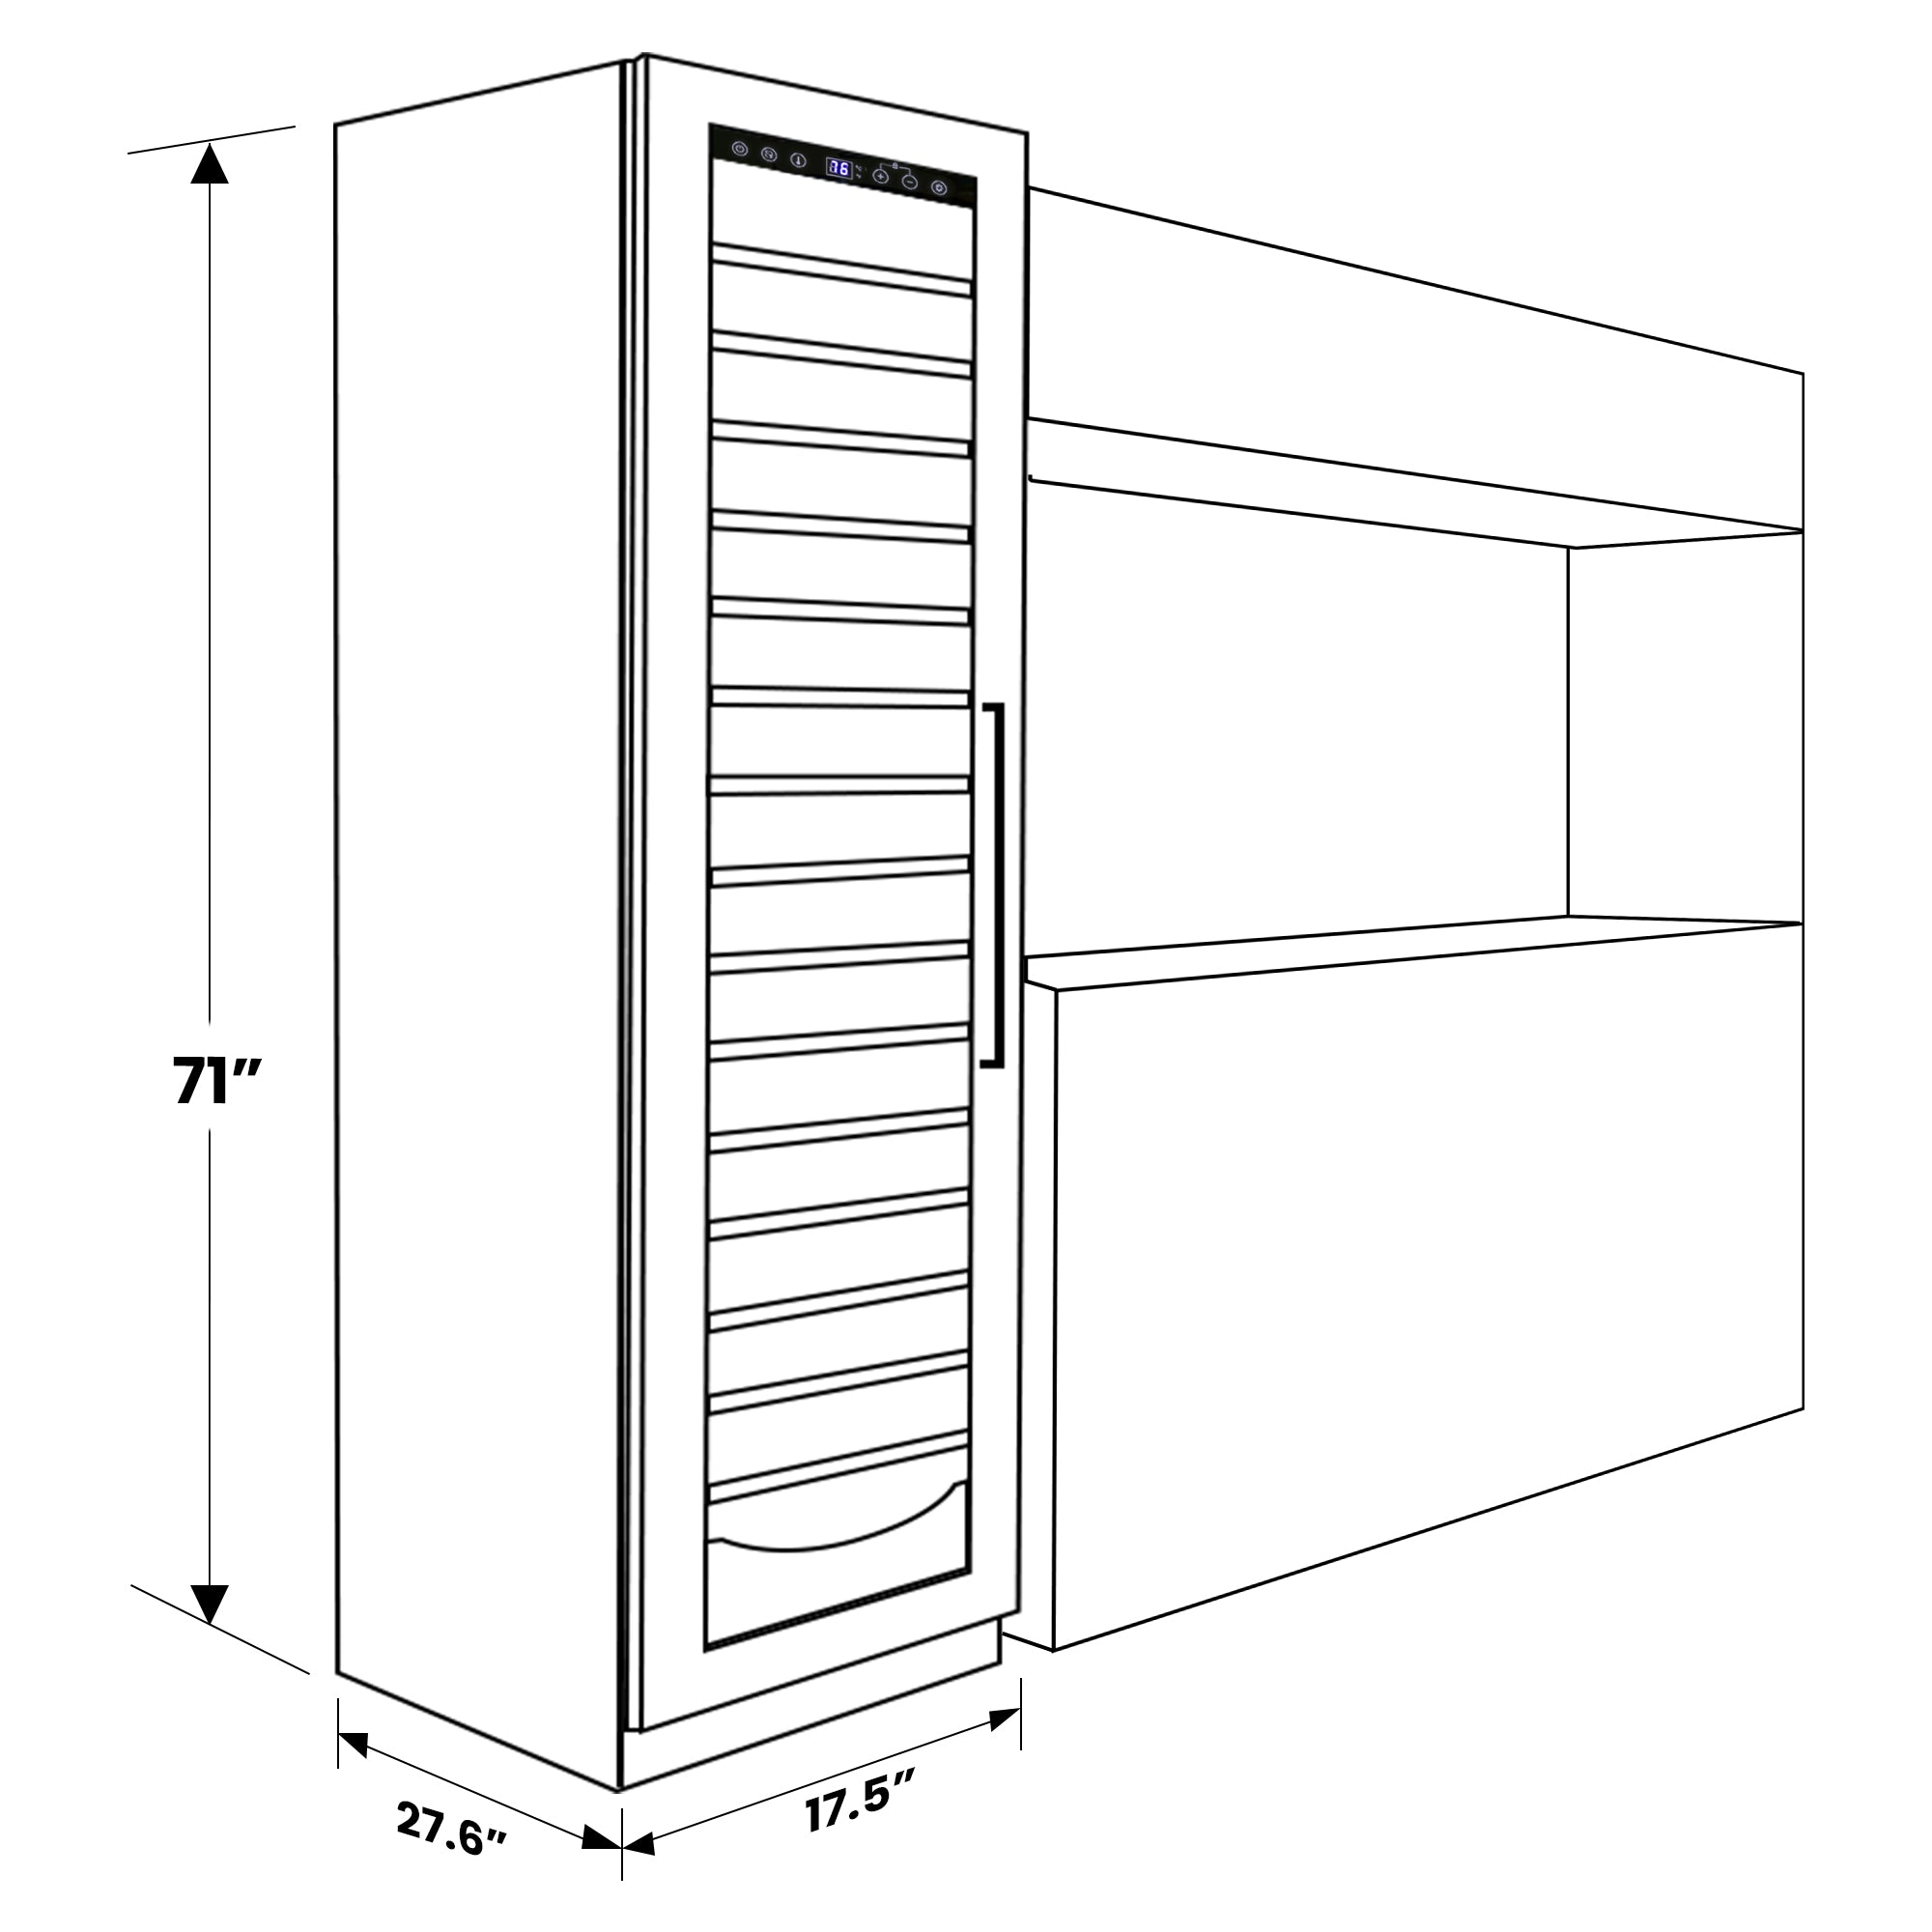 Diagram showing measurements and installation of 18-inch wine compressor fridge